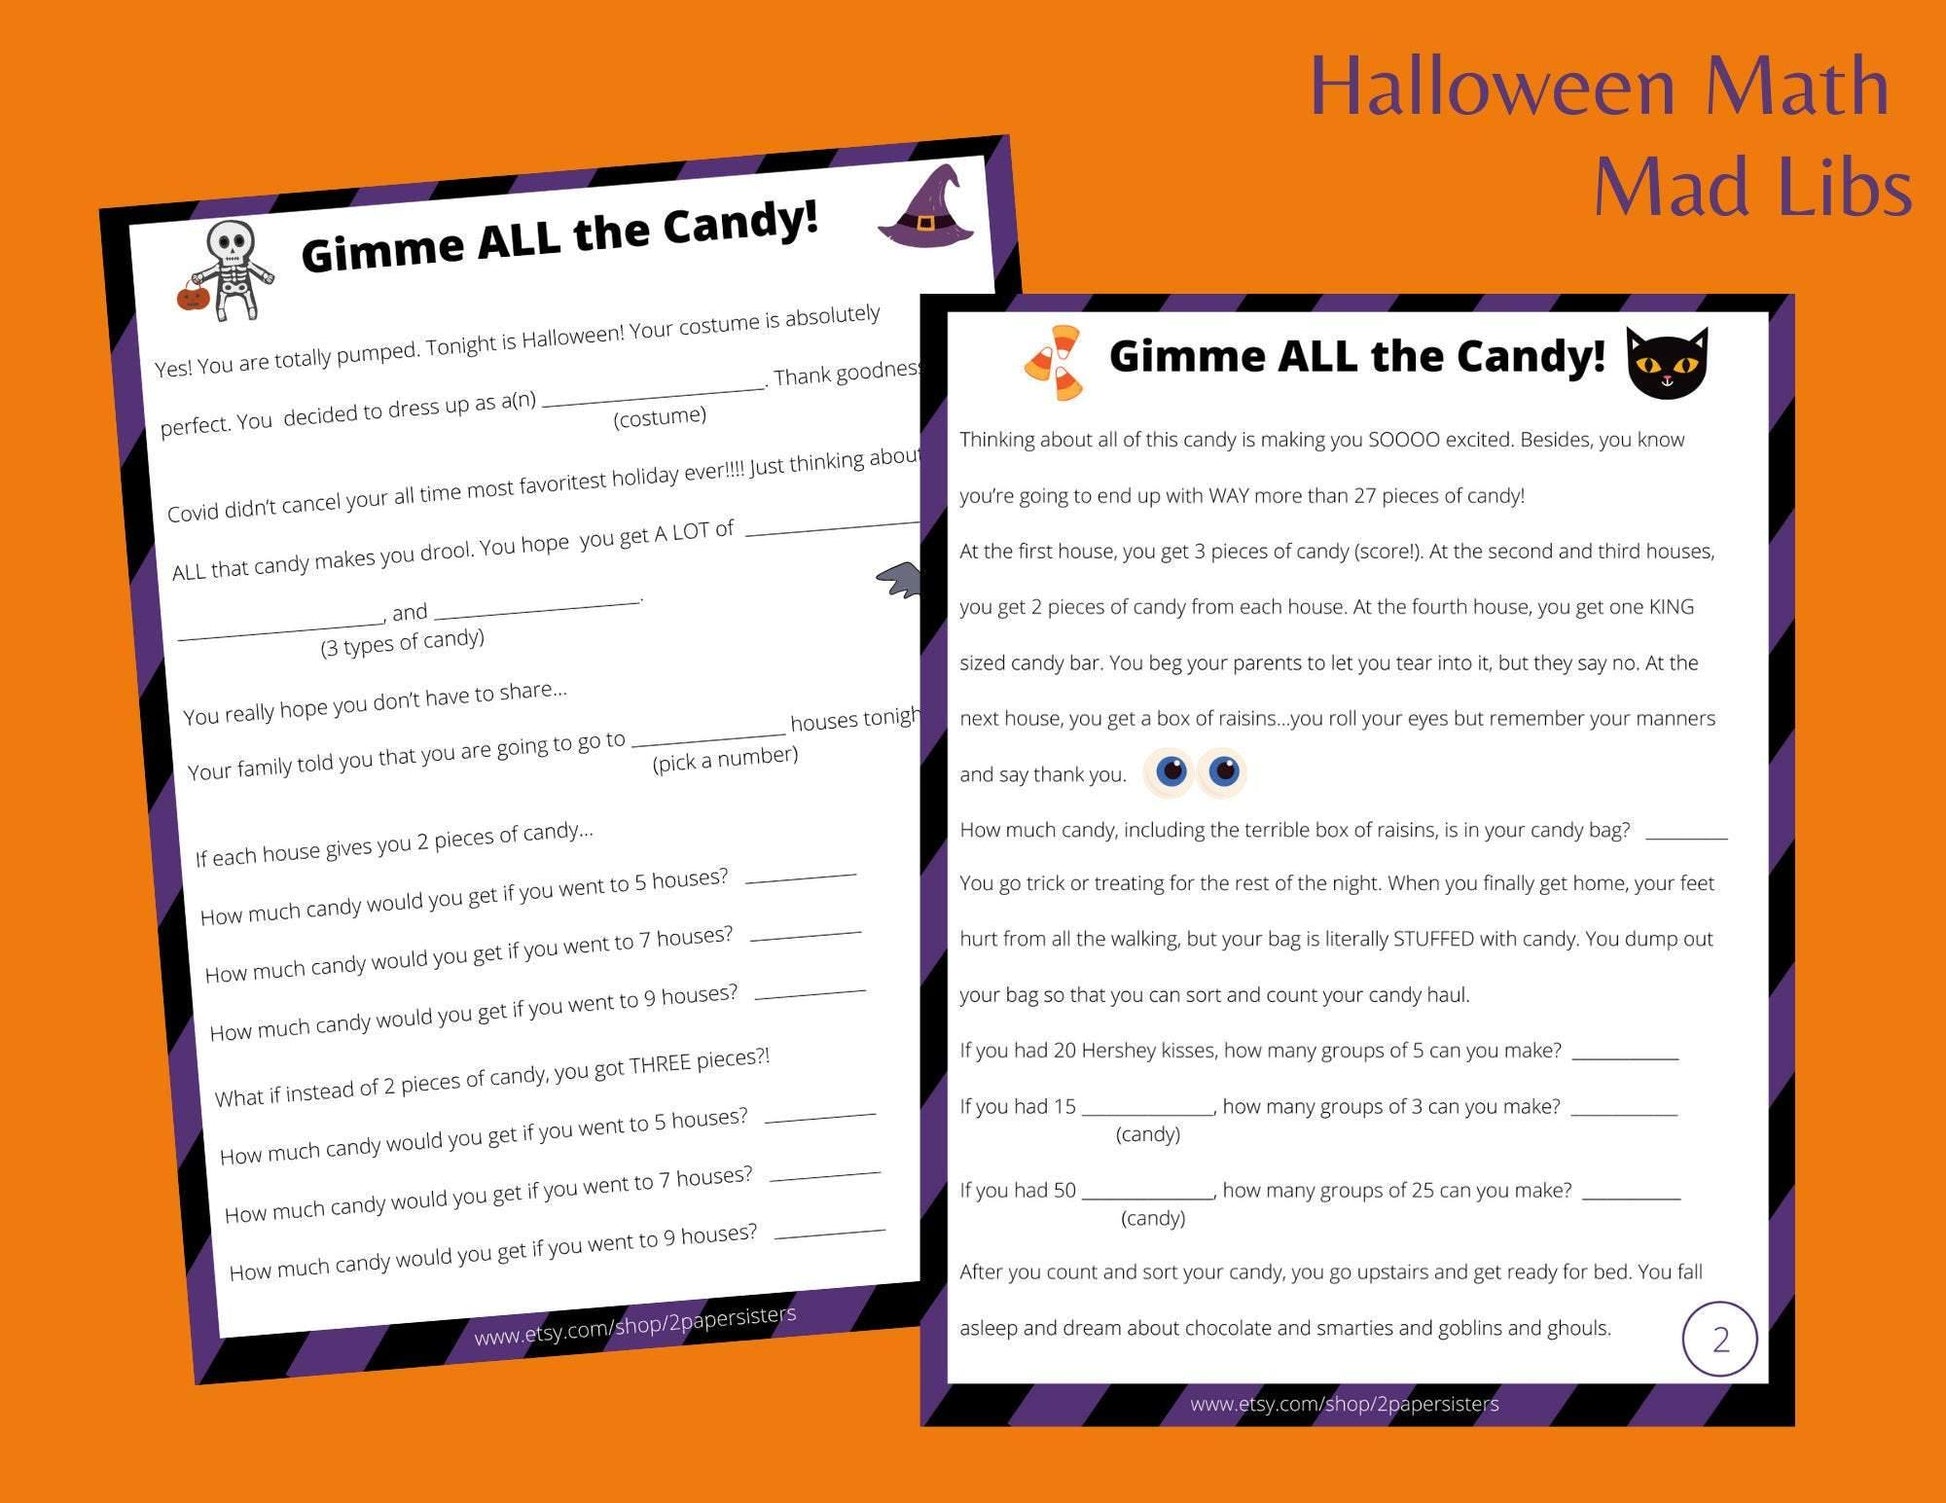 Halloween Story, Math, Mad Libs, Elementary Math, Homeschool Math, Add, Divide, Reading, Kid Story, SAHM, INSTANT DOWNLOAD - 2 Paper Sisters